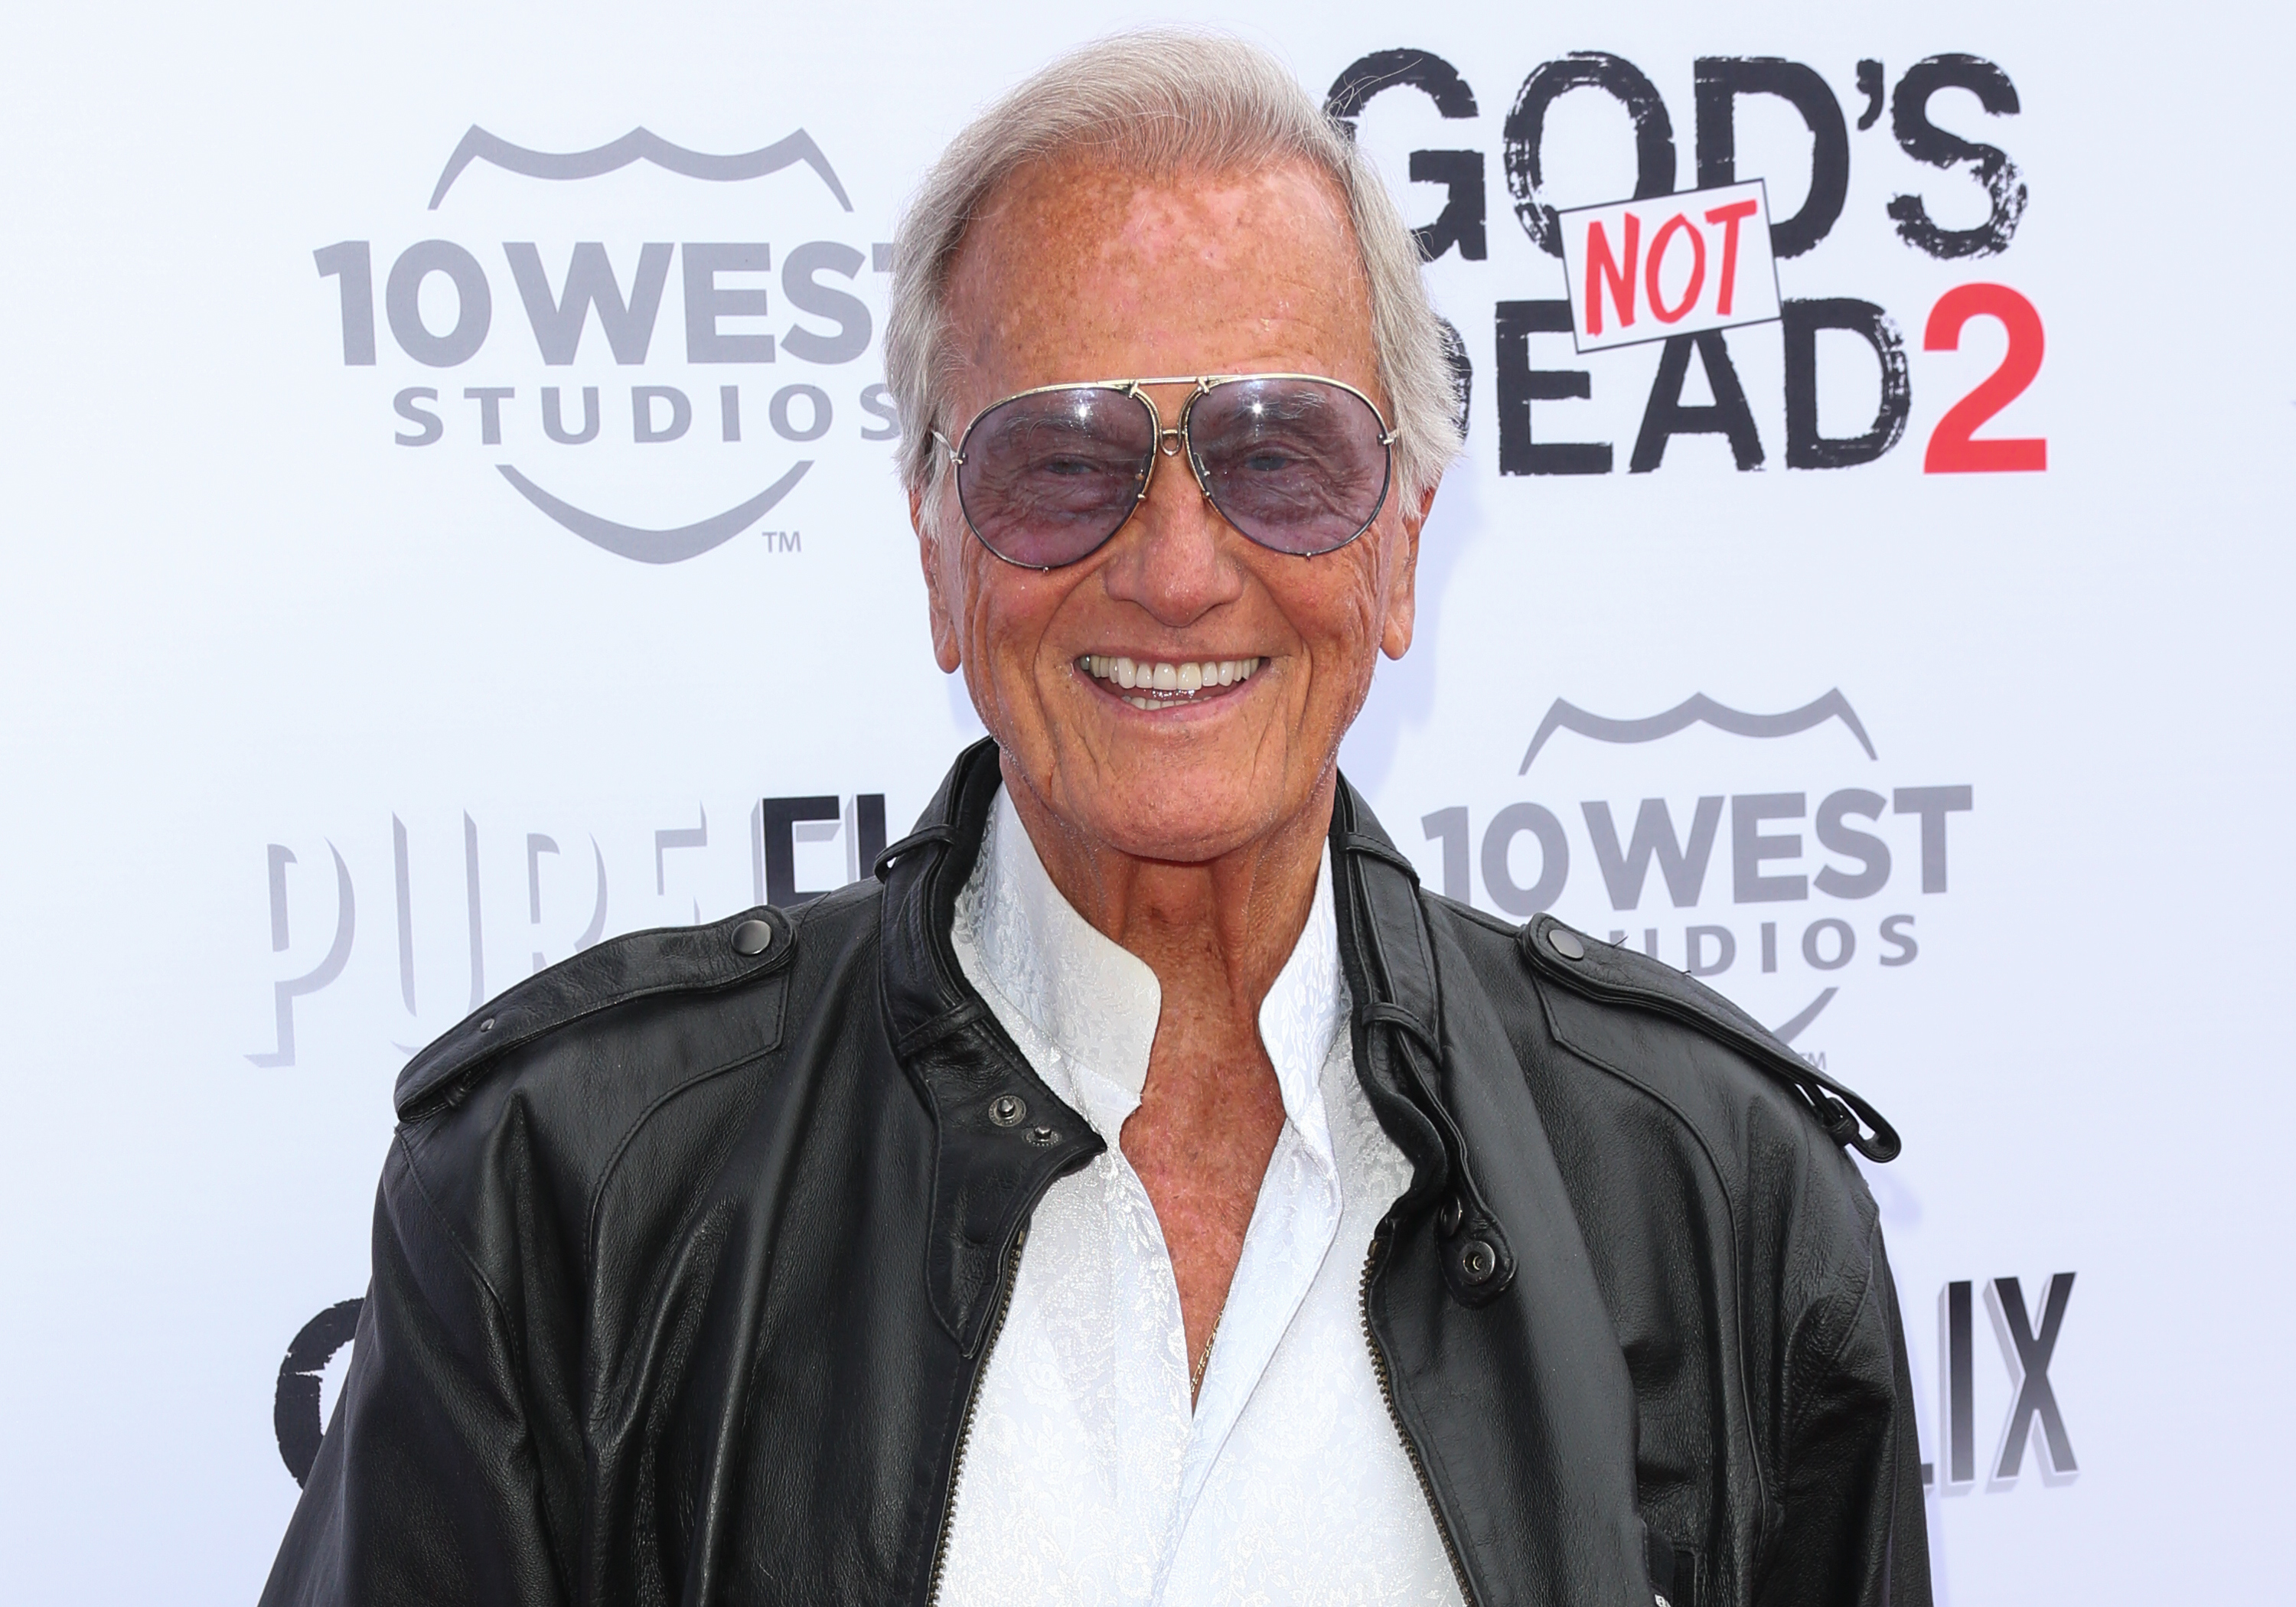 Singer Pat Boone attends the premiere of "God's Not Dead 2" at Directors Guild Of America on March 21, 2016 in Los Angeles, California. (Paul Archuleta&mdash;FilmMagic/Getty Images)